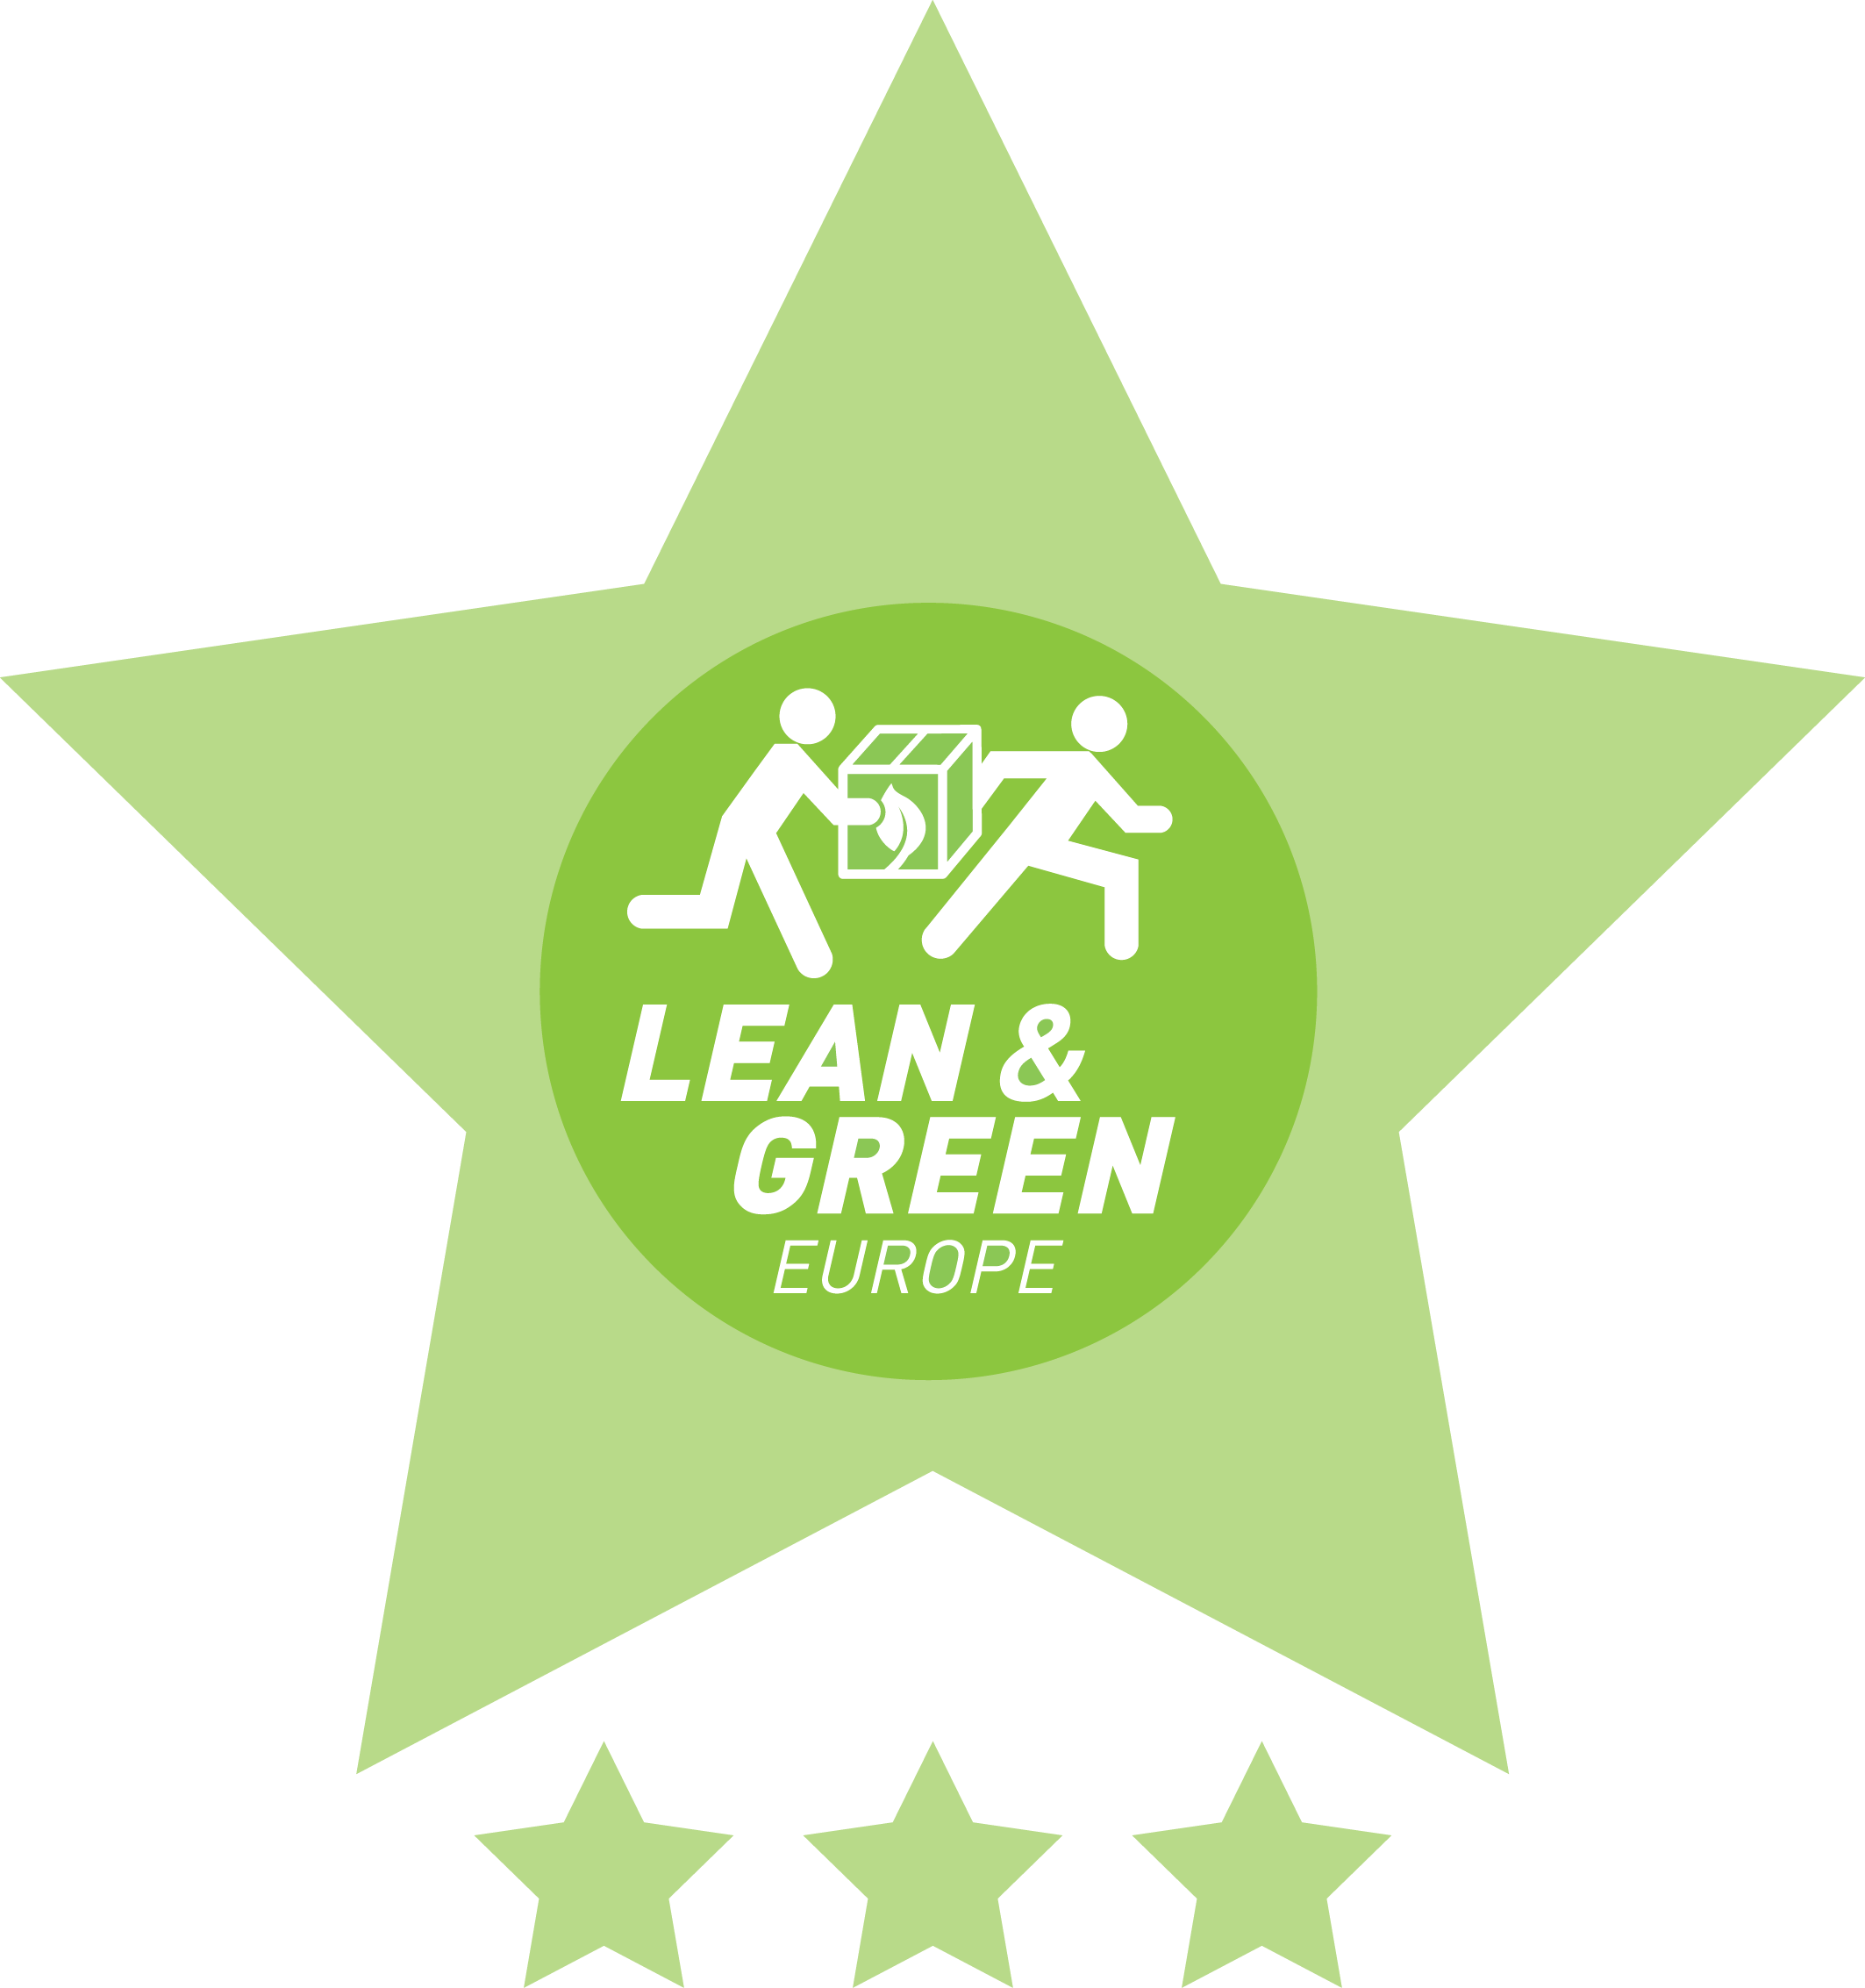 Lean and green stars